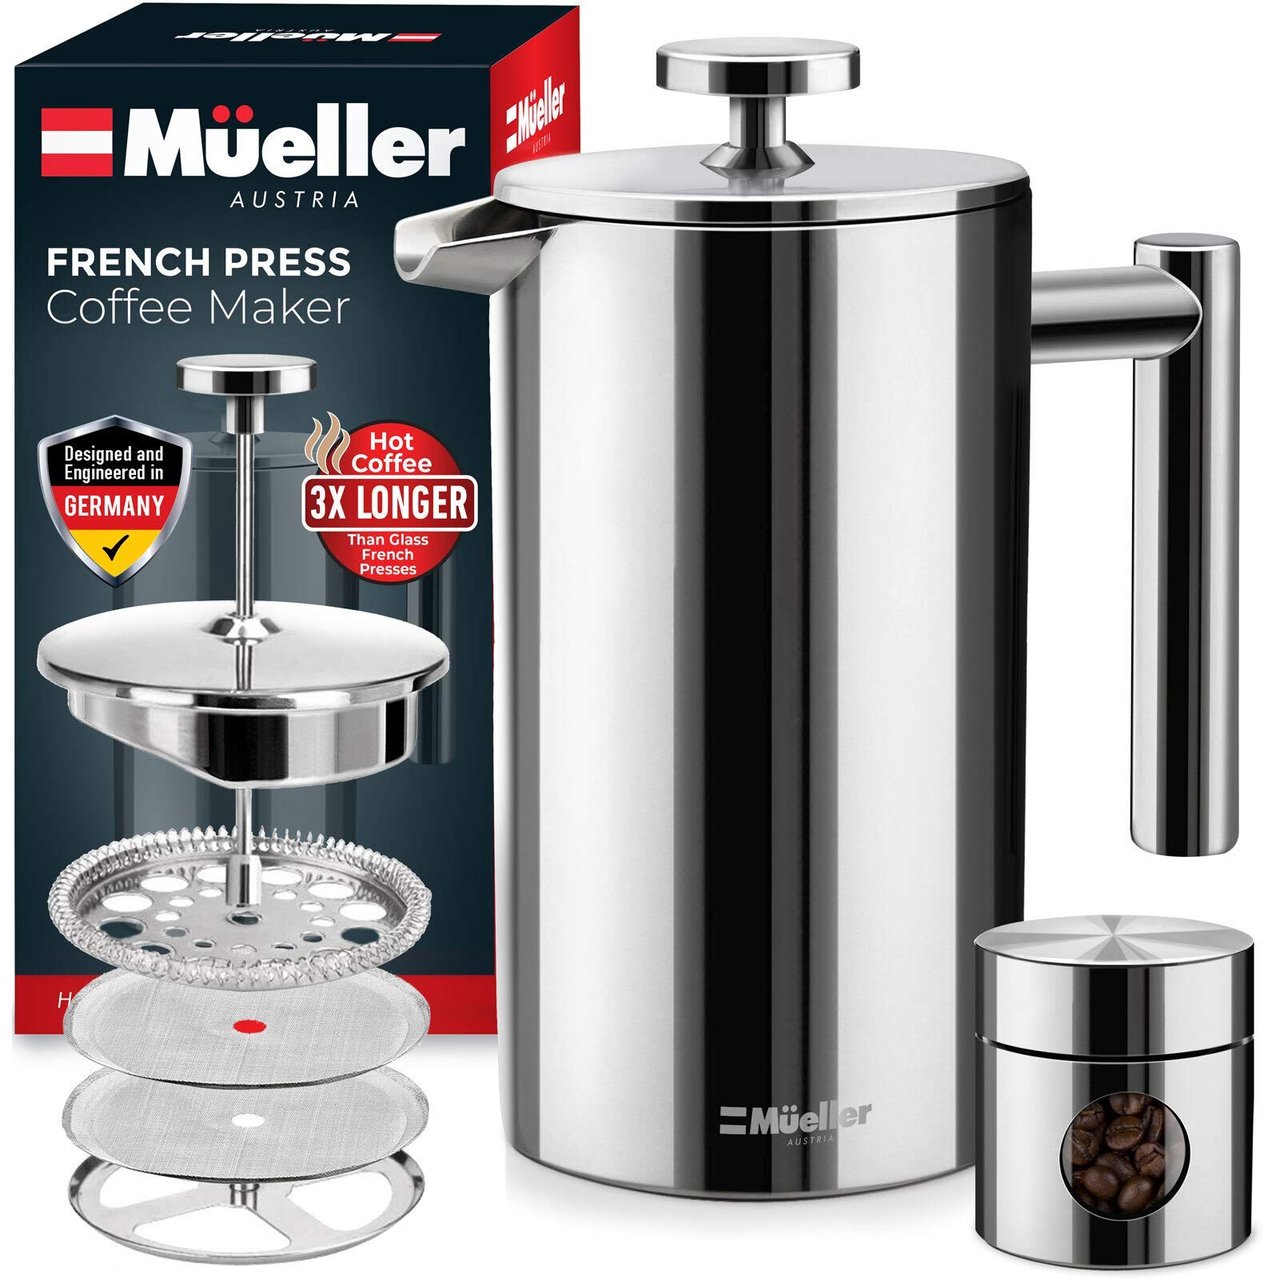 1 Stainless Steel Coffee Maker - Insulated with Advanced Filtration System